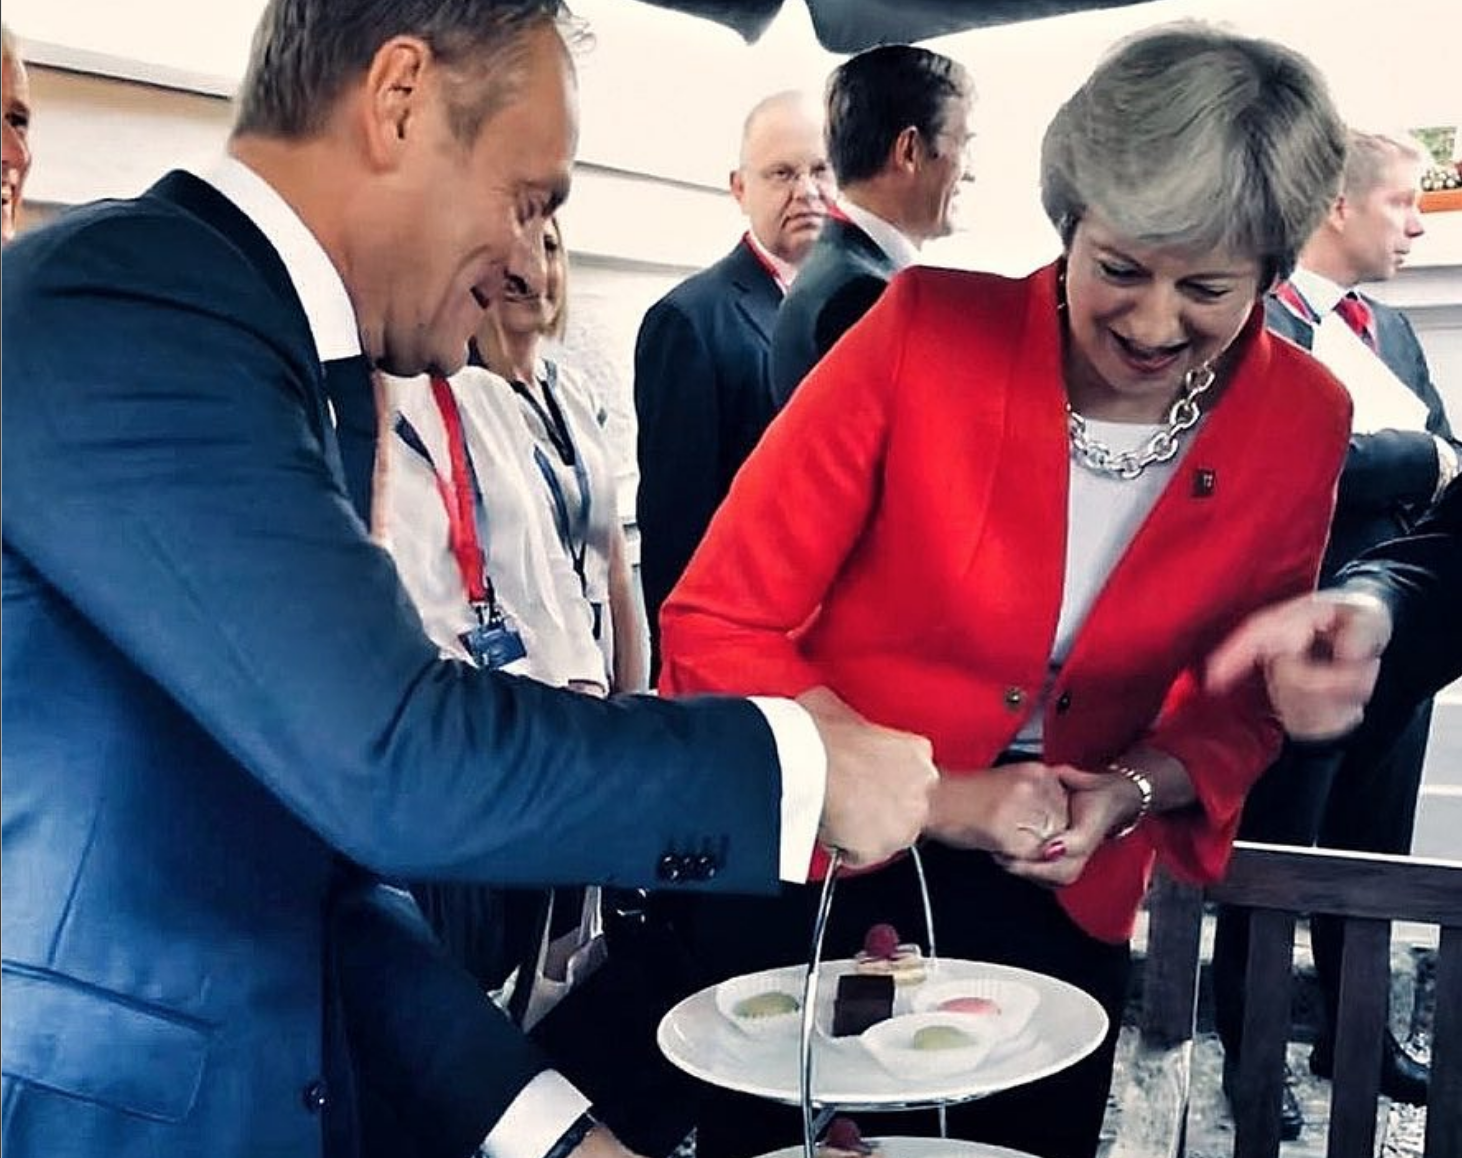 Theresa May ‘having her cake and eating it’ should be reserved for literal instances of the prime minister enjoying baked goods